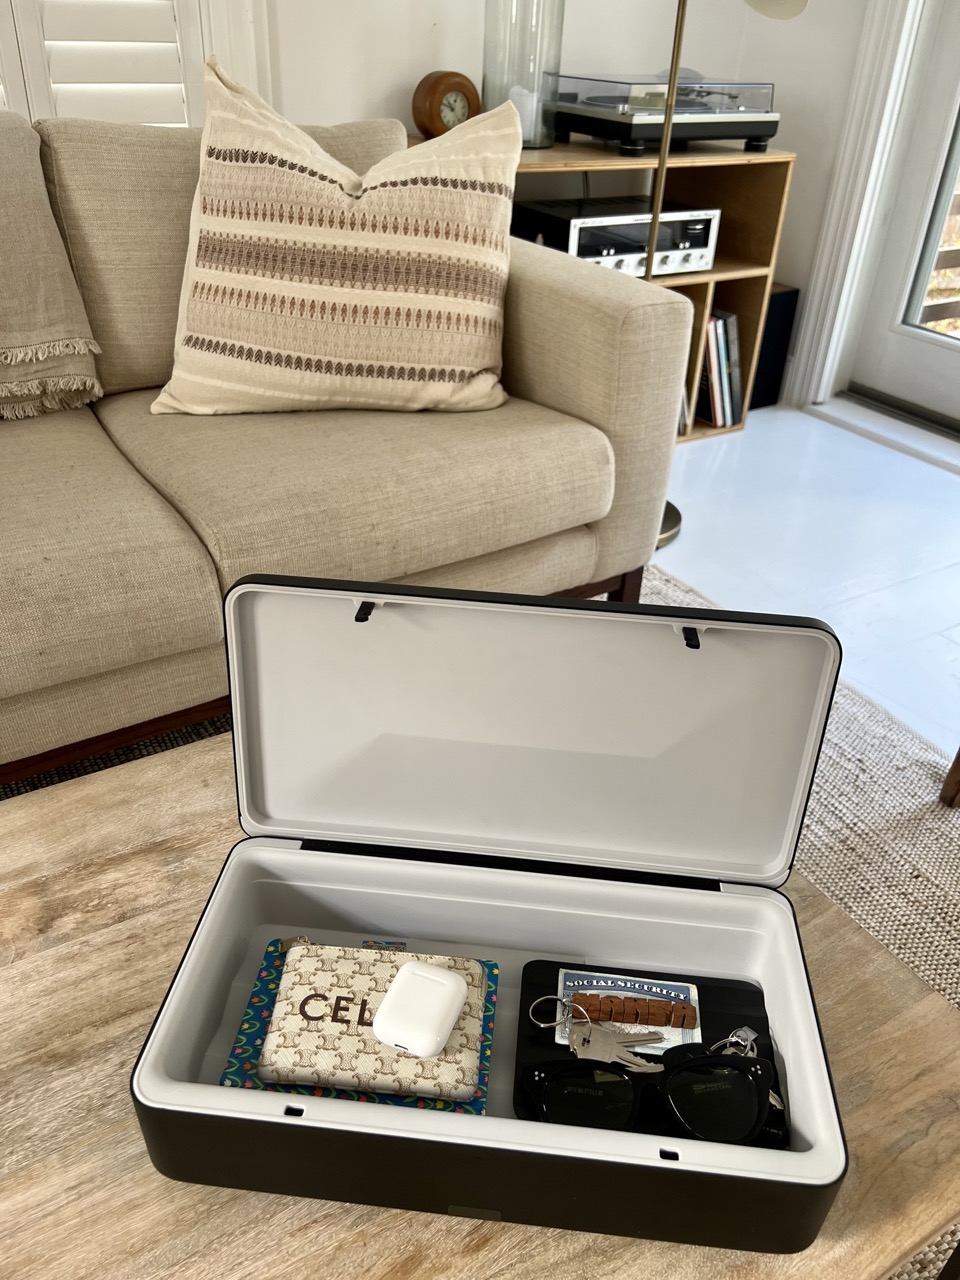 photograph of a TROVA home safe on a coffee table containing a variety of items; keys, AirPods, a journal, a pair of glasses. 